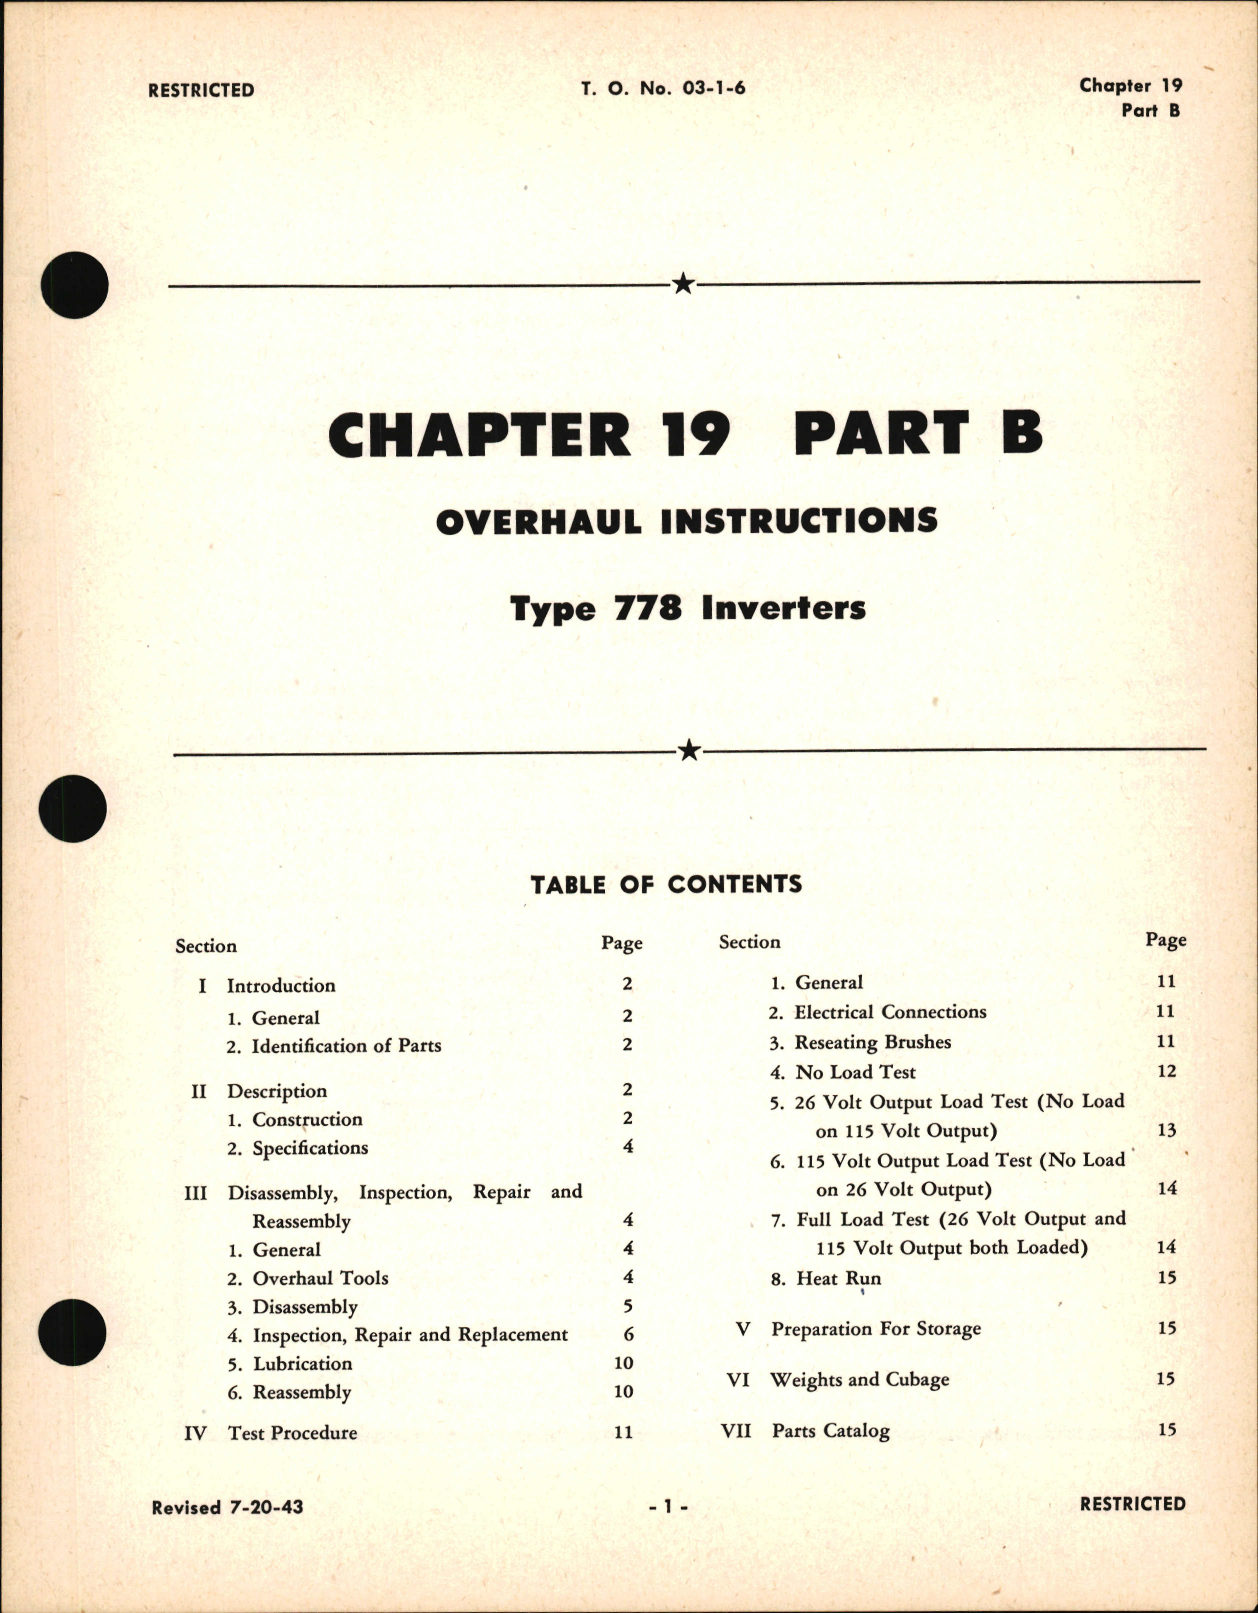 Sample page 1 from AirCorps Library document: Overhaul Instructions for Type 778 Inverters